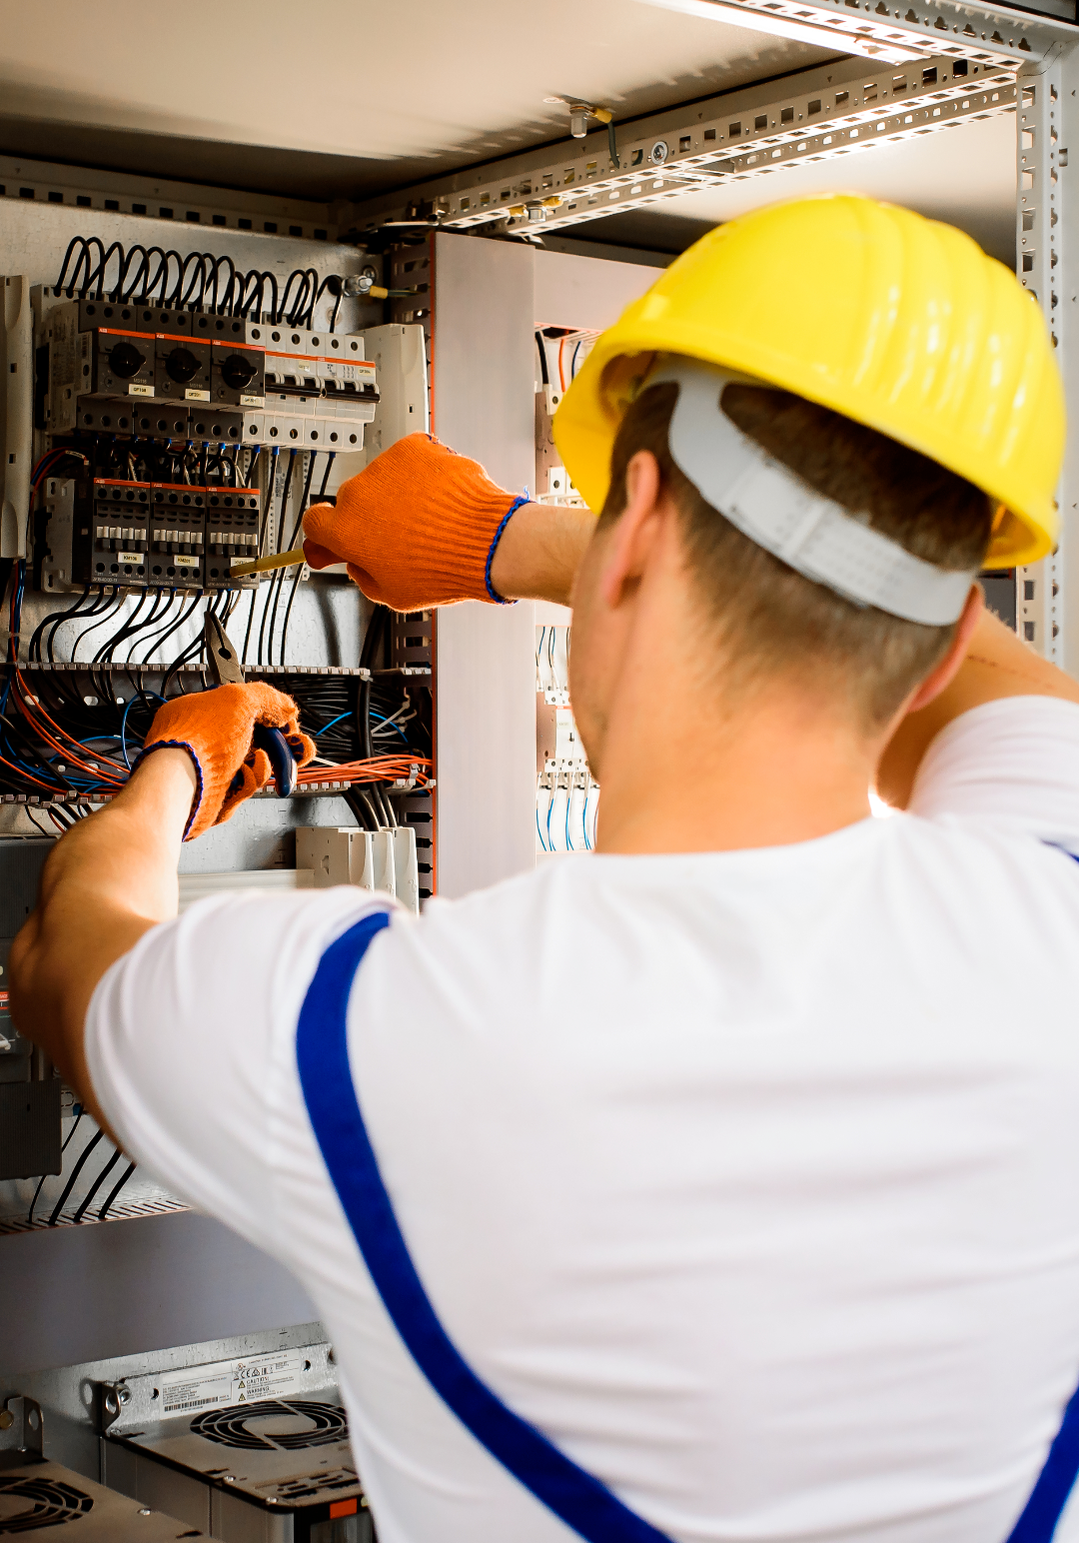 Image of an electrician working - Shreveport Electrical JATC - Electrical Training Programs in Shreveport- Bossier City 